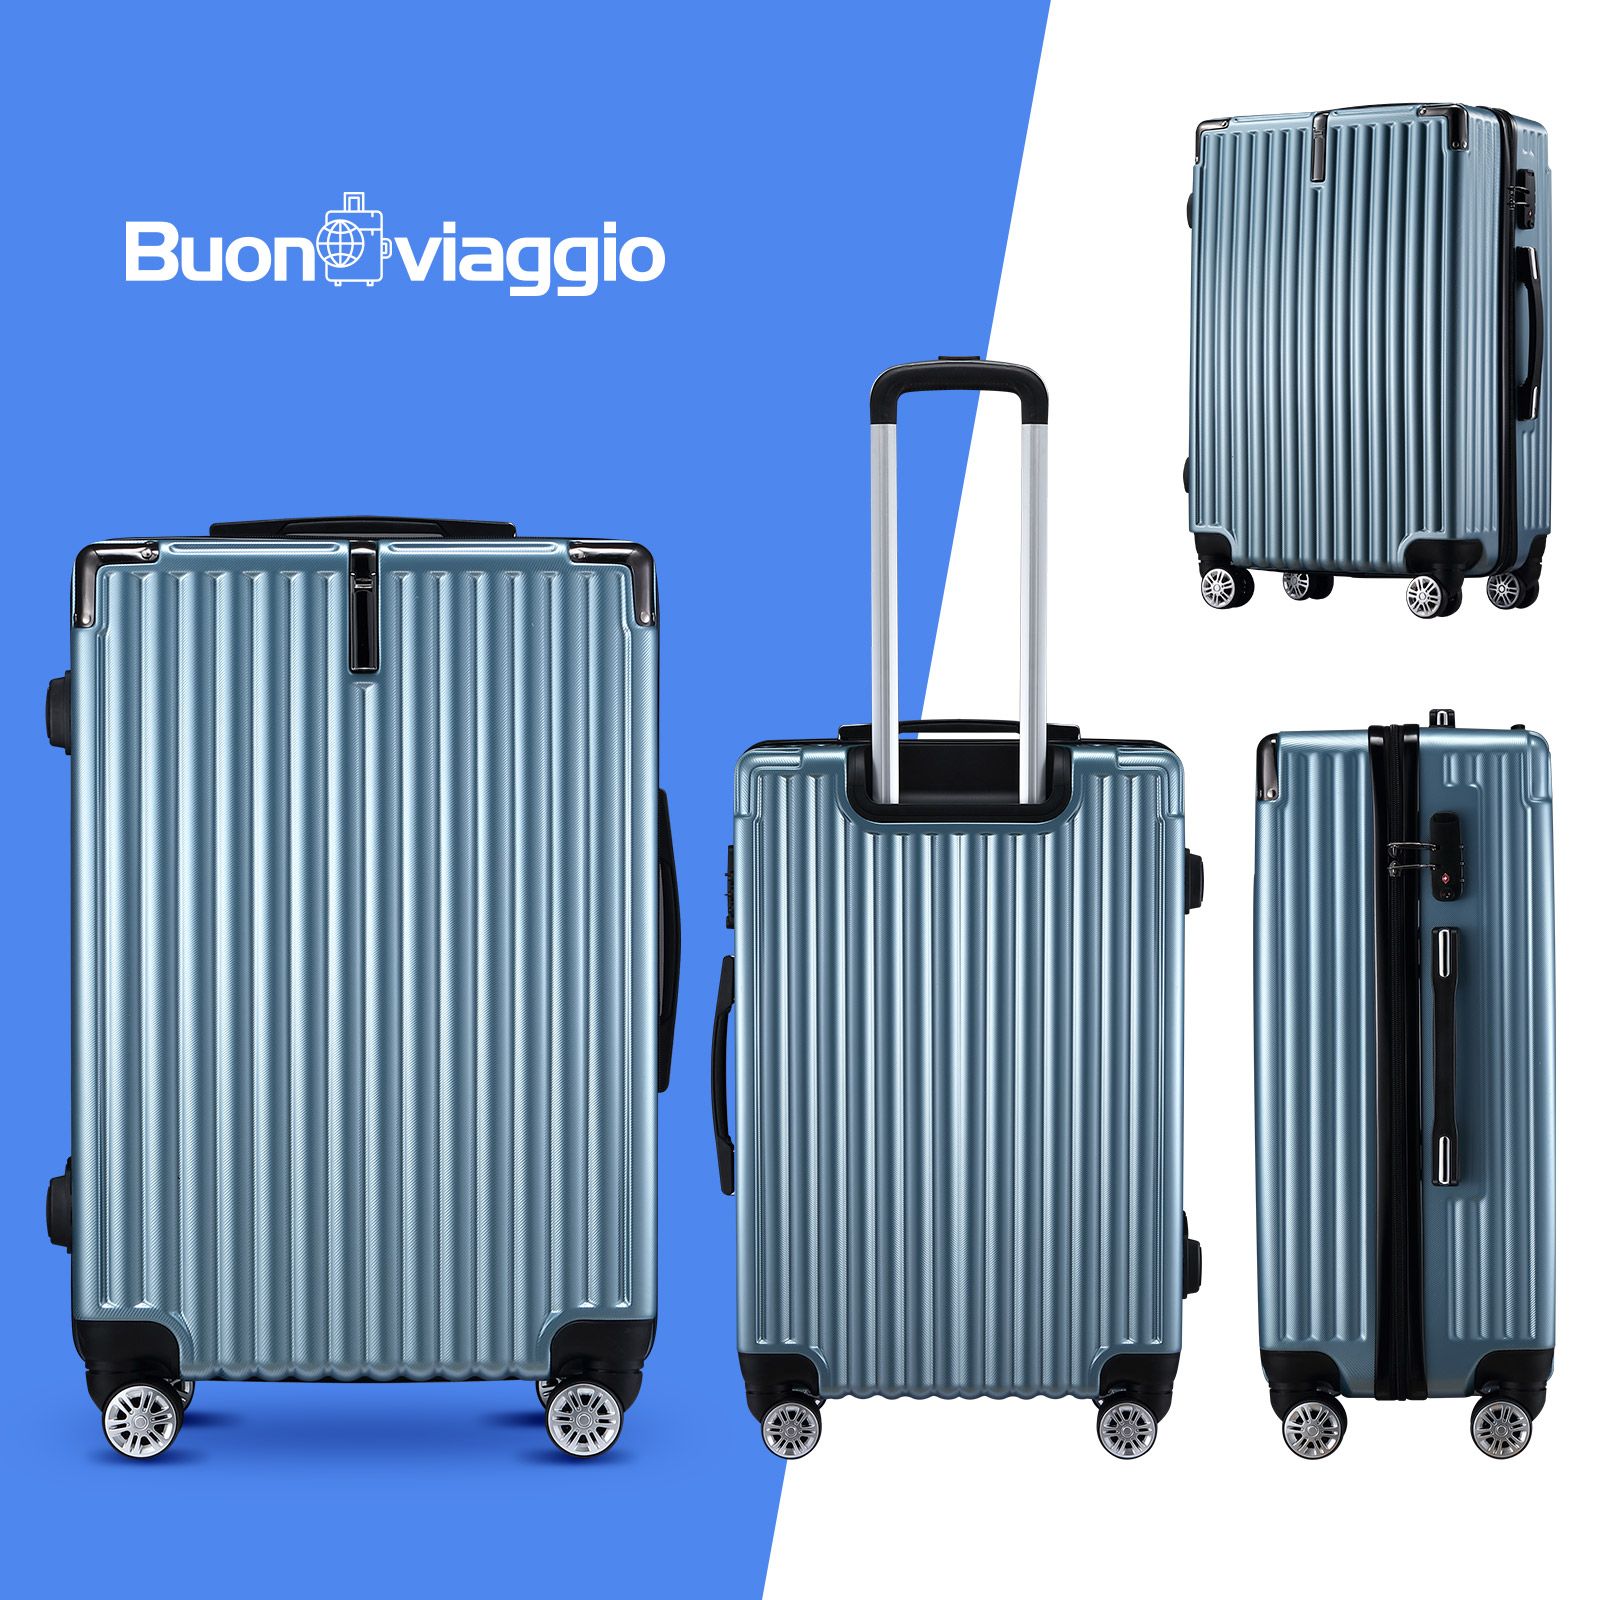 2 PCS Luggage Set Suitcases Carry On Spinner Traveller Bags Cabin Hard Shell Case Trolley Lightweight Travel Storage Rolling TSA Lock Ice Blue